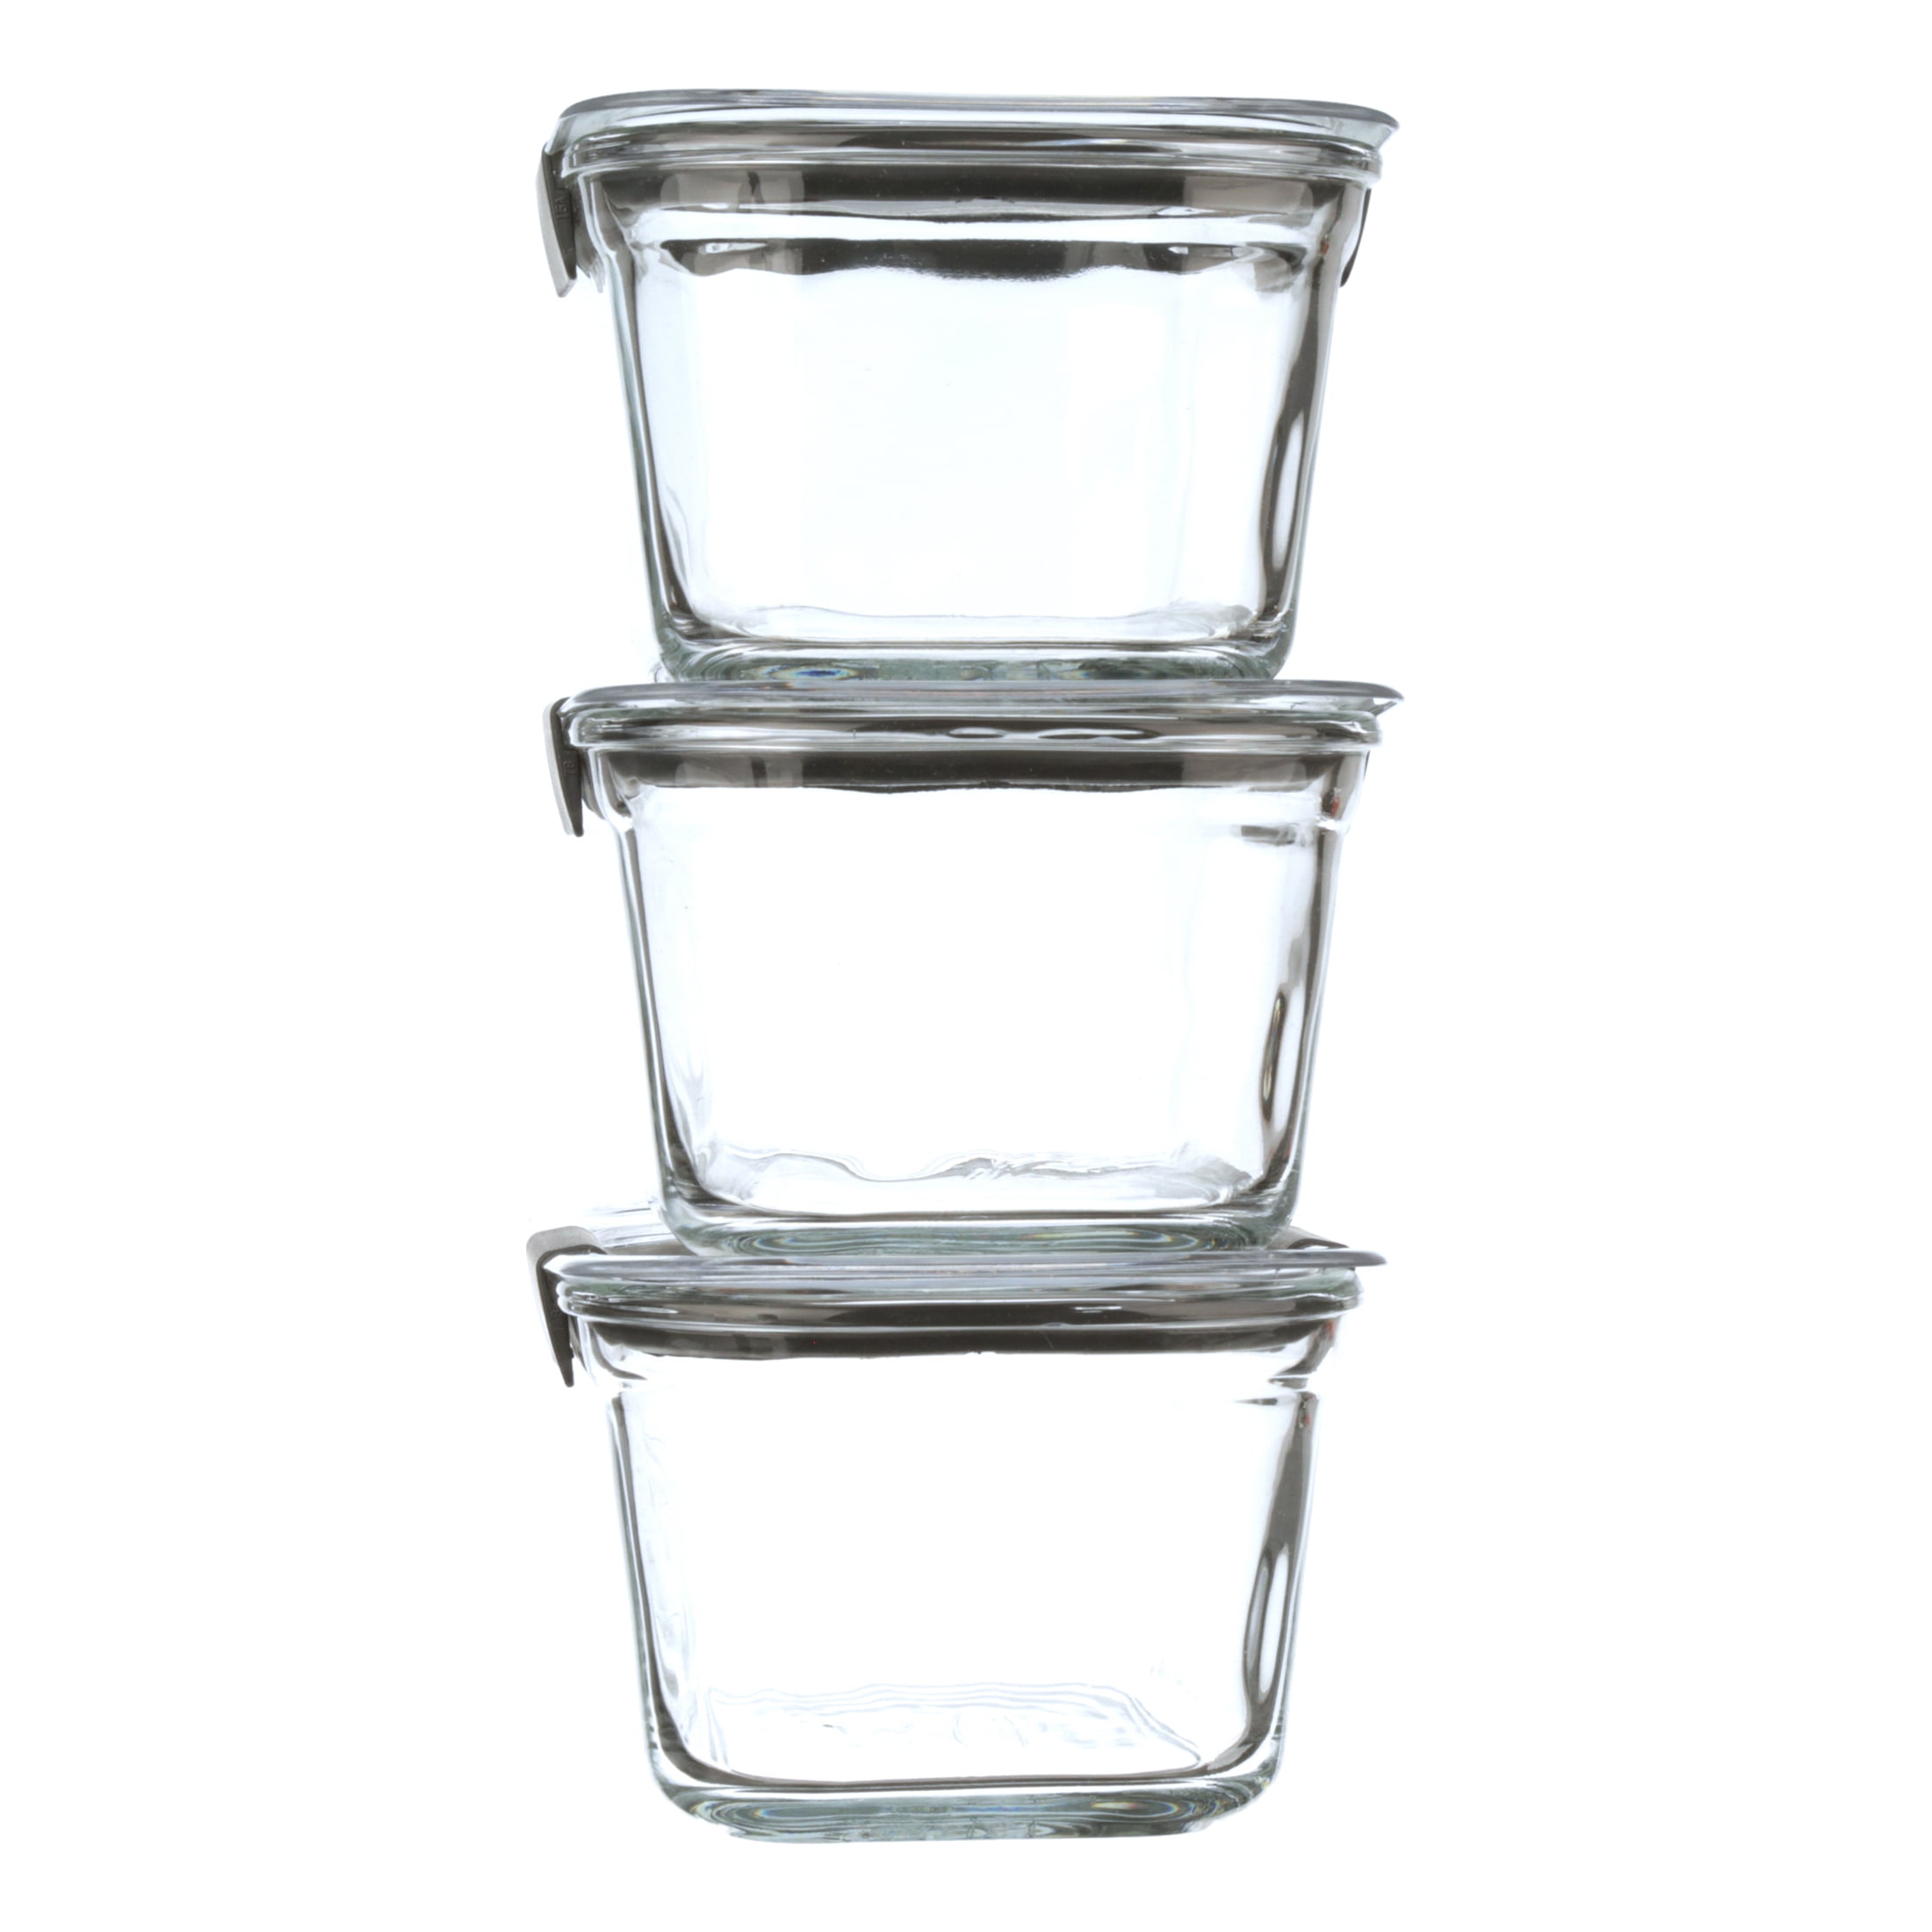 Rubbermaid® Brilliance Small Food Containers - Clear, 2 pk - City Market